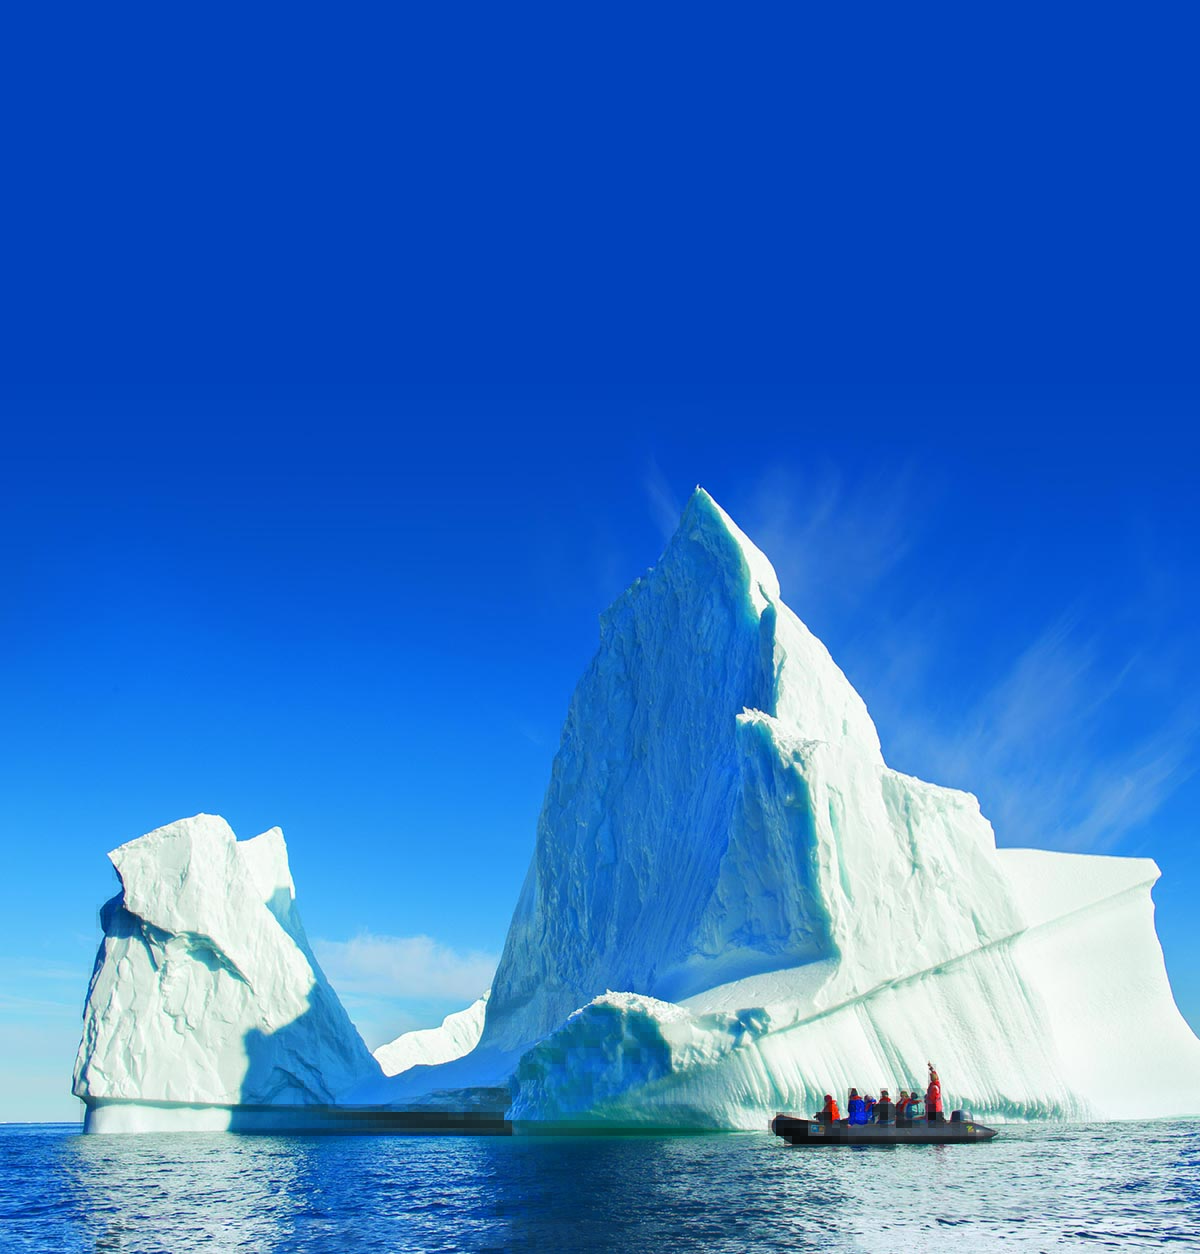 An iceberg in the sea with people looking at it from a speed boat